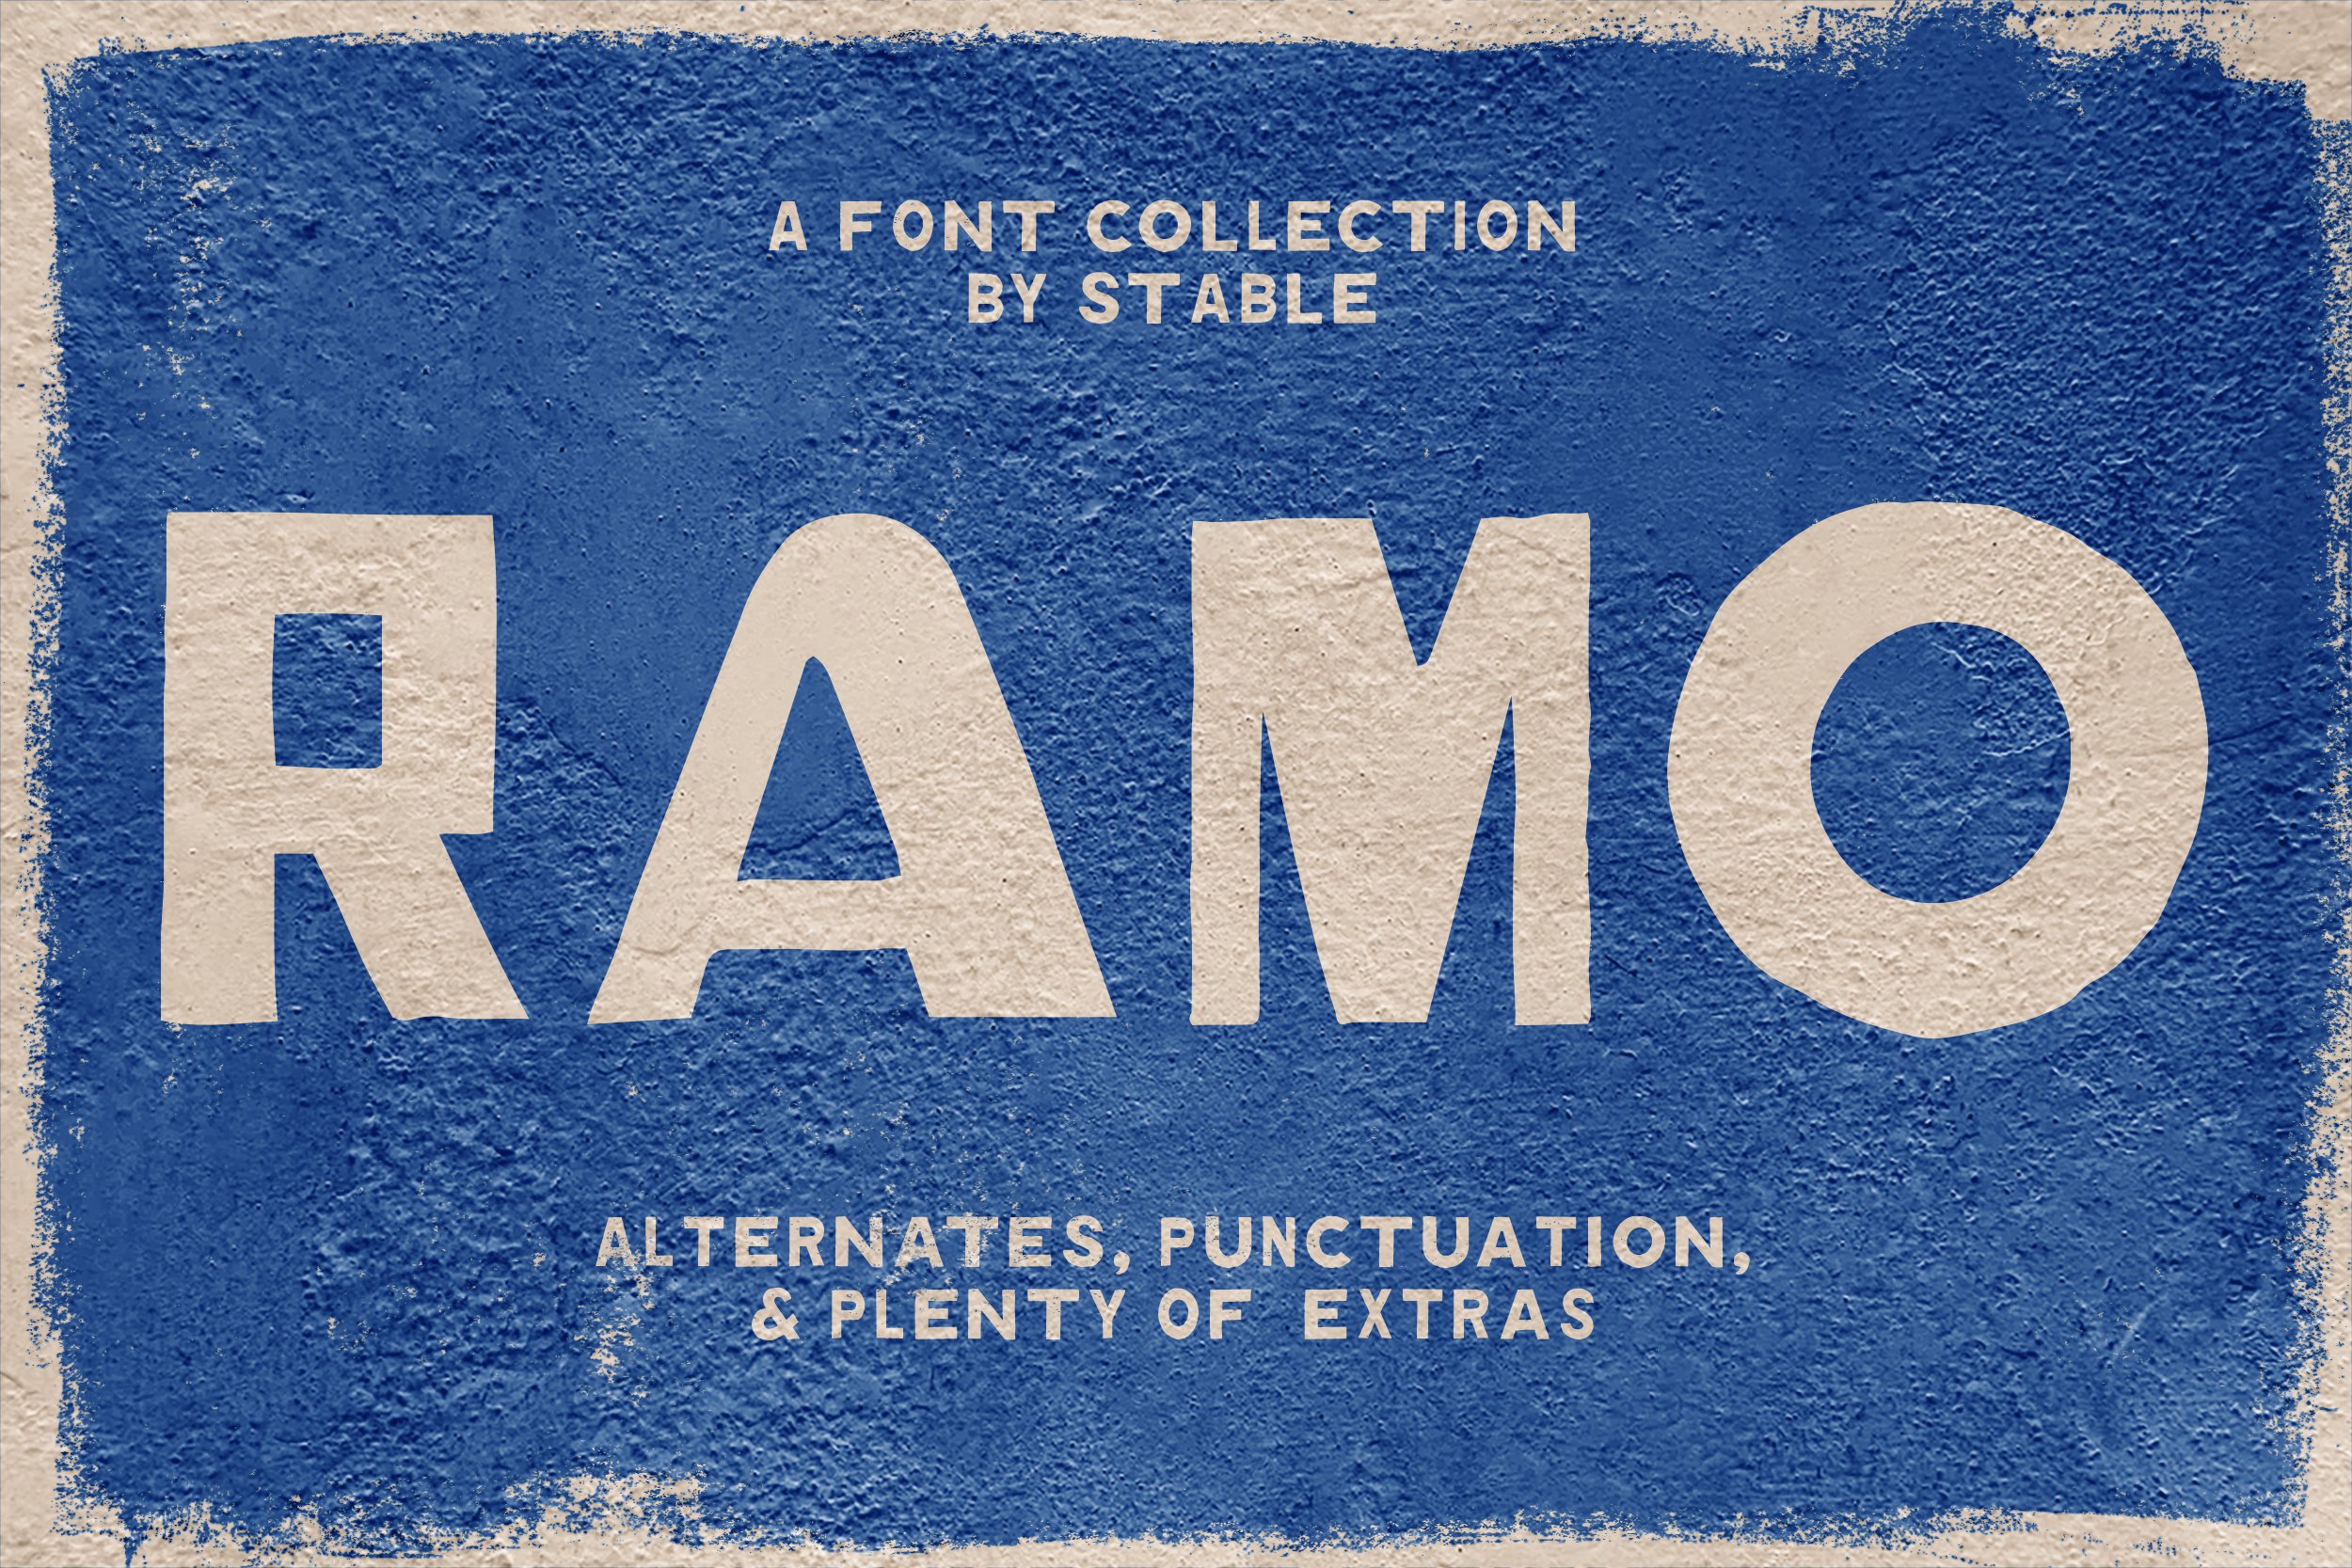 Ramo Font Collection cover image.